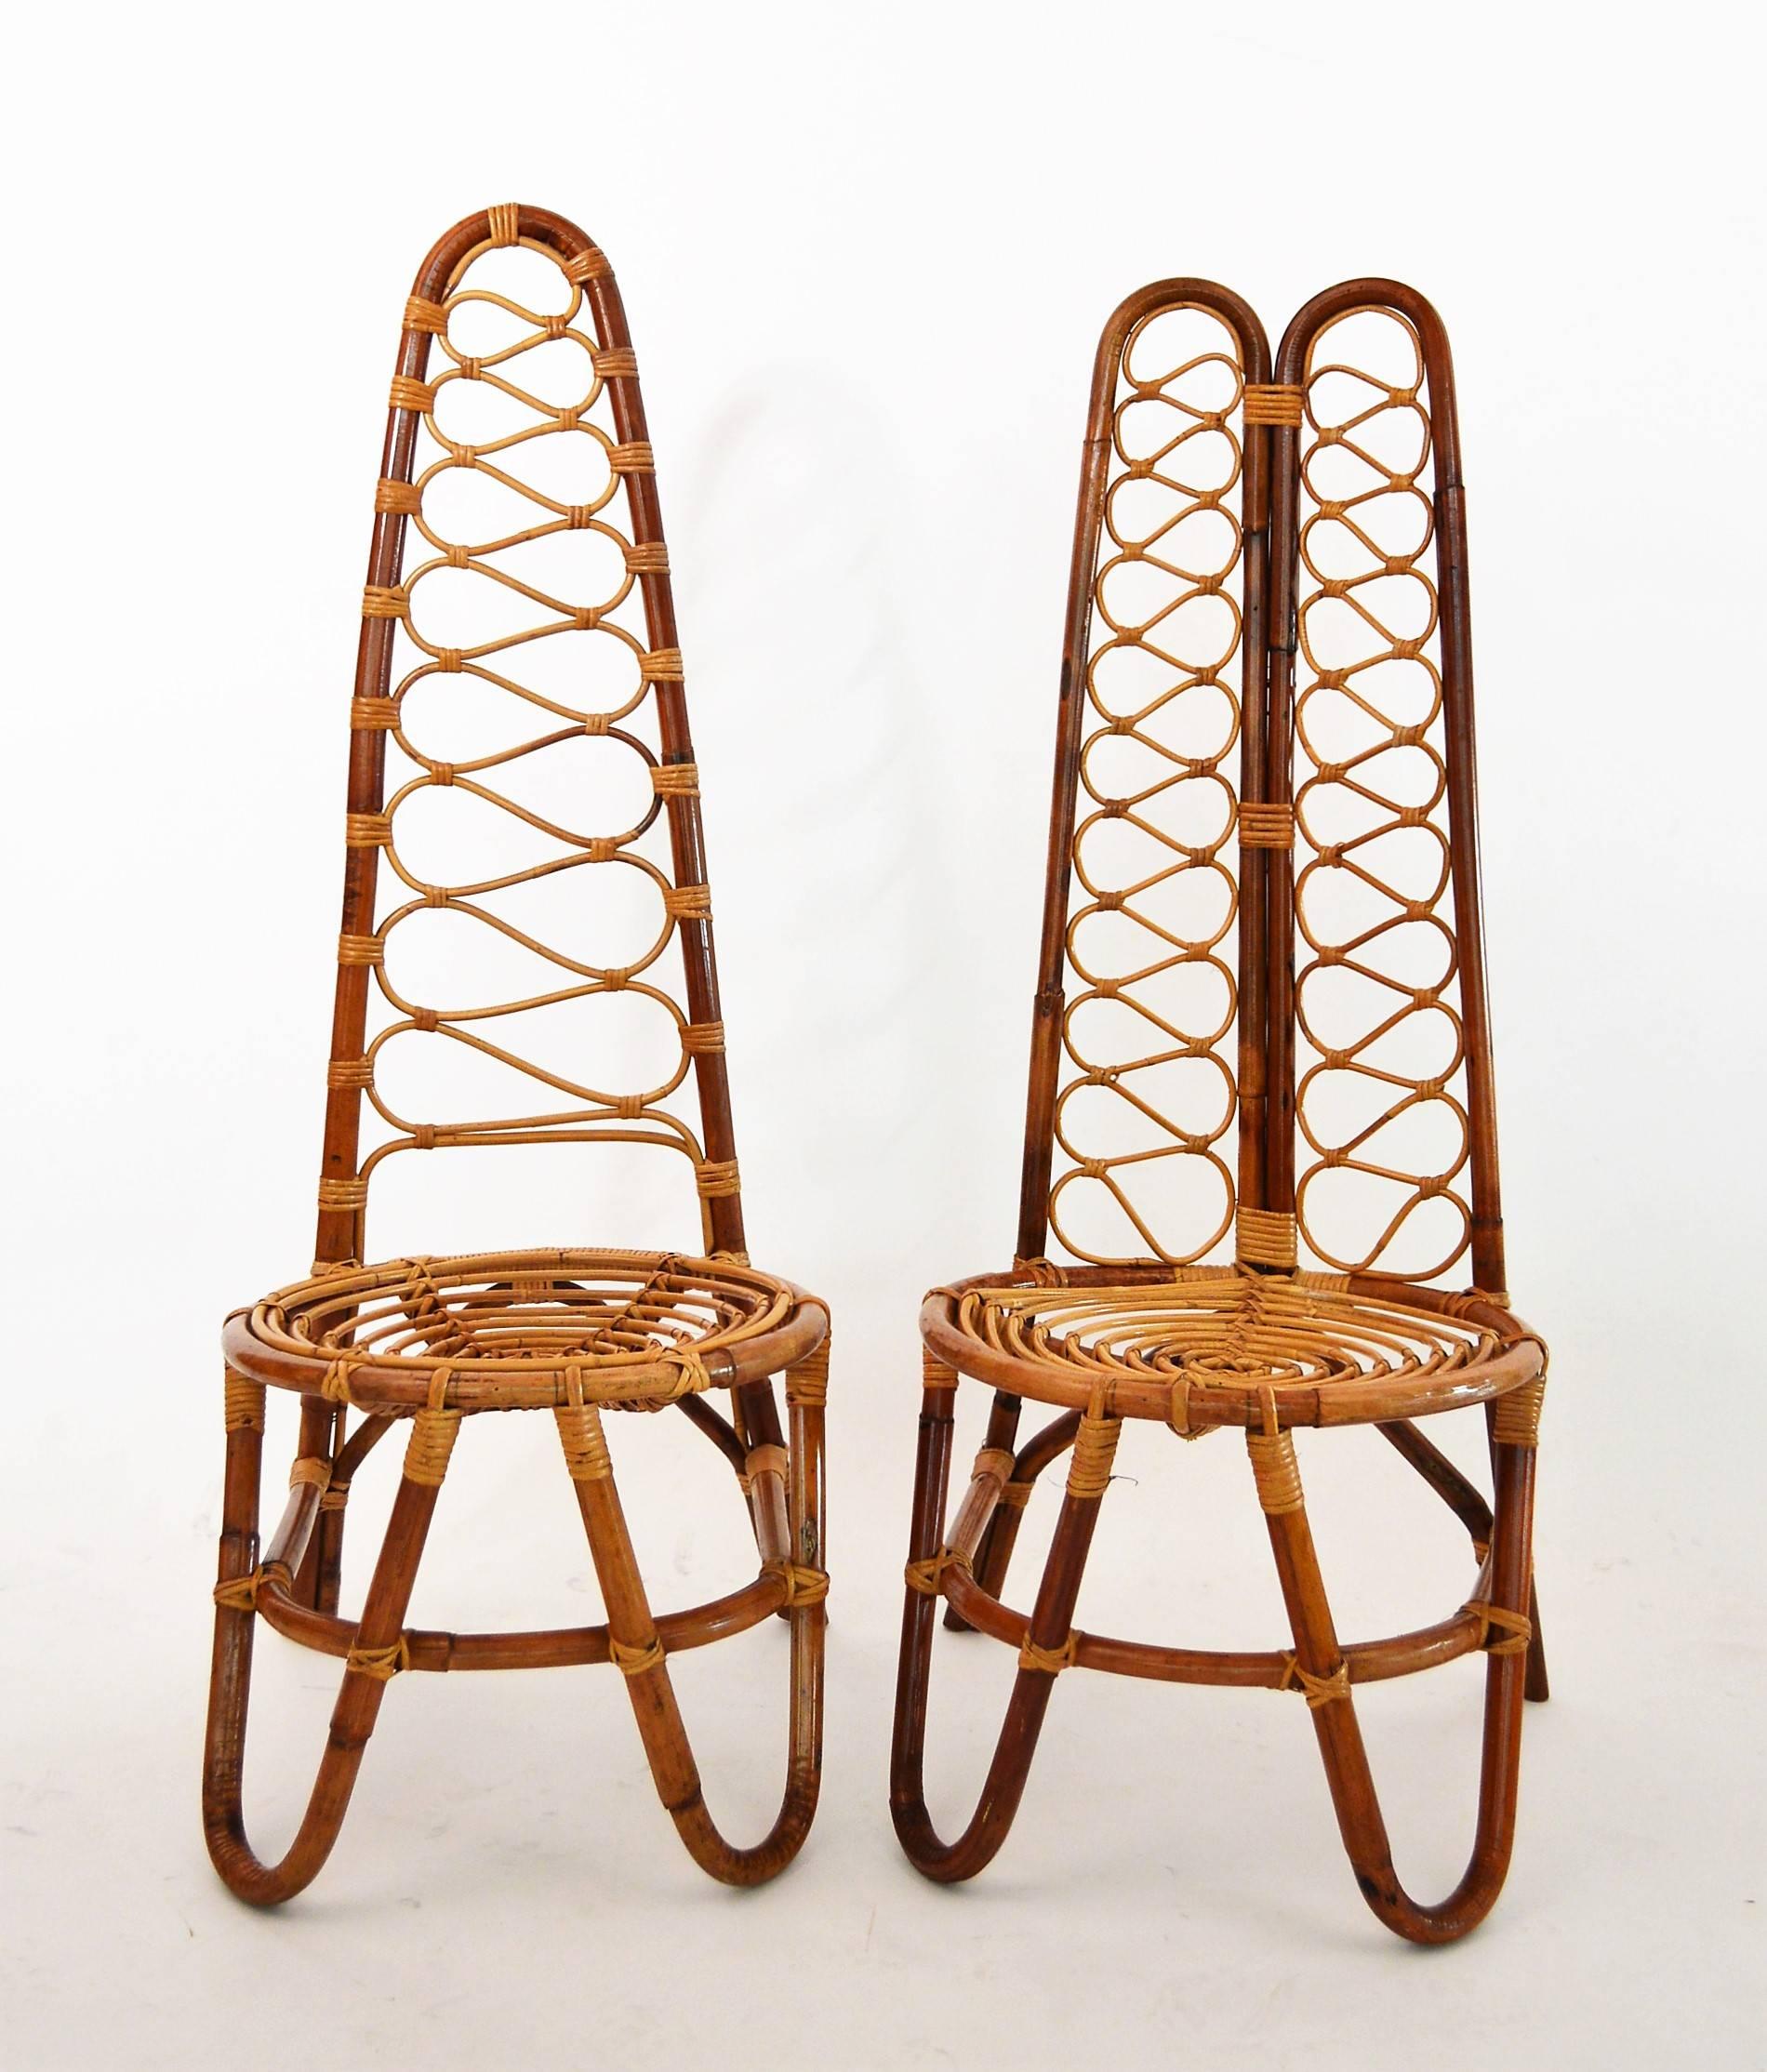 Set of six midcentury Riviera bamboo chairs, composed of
three pieces with single high back
three pieces with double high back
Both chairs are slight different in height of the back, whilst the seat height is the same.
This beautiful set is in